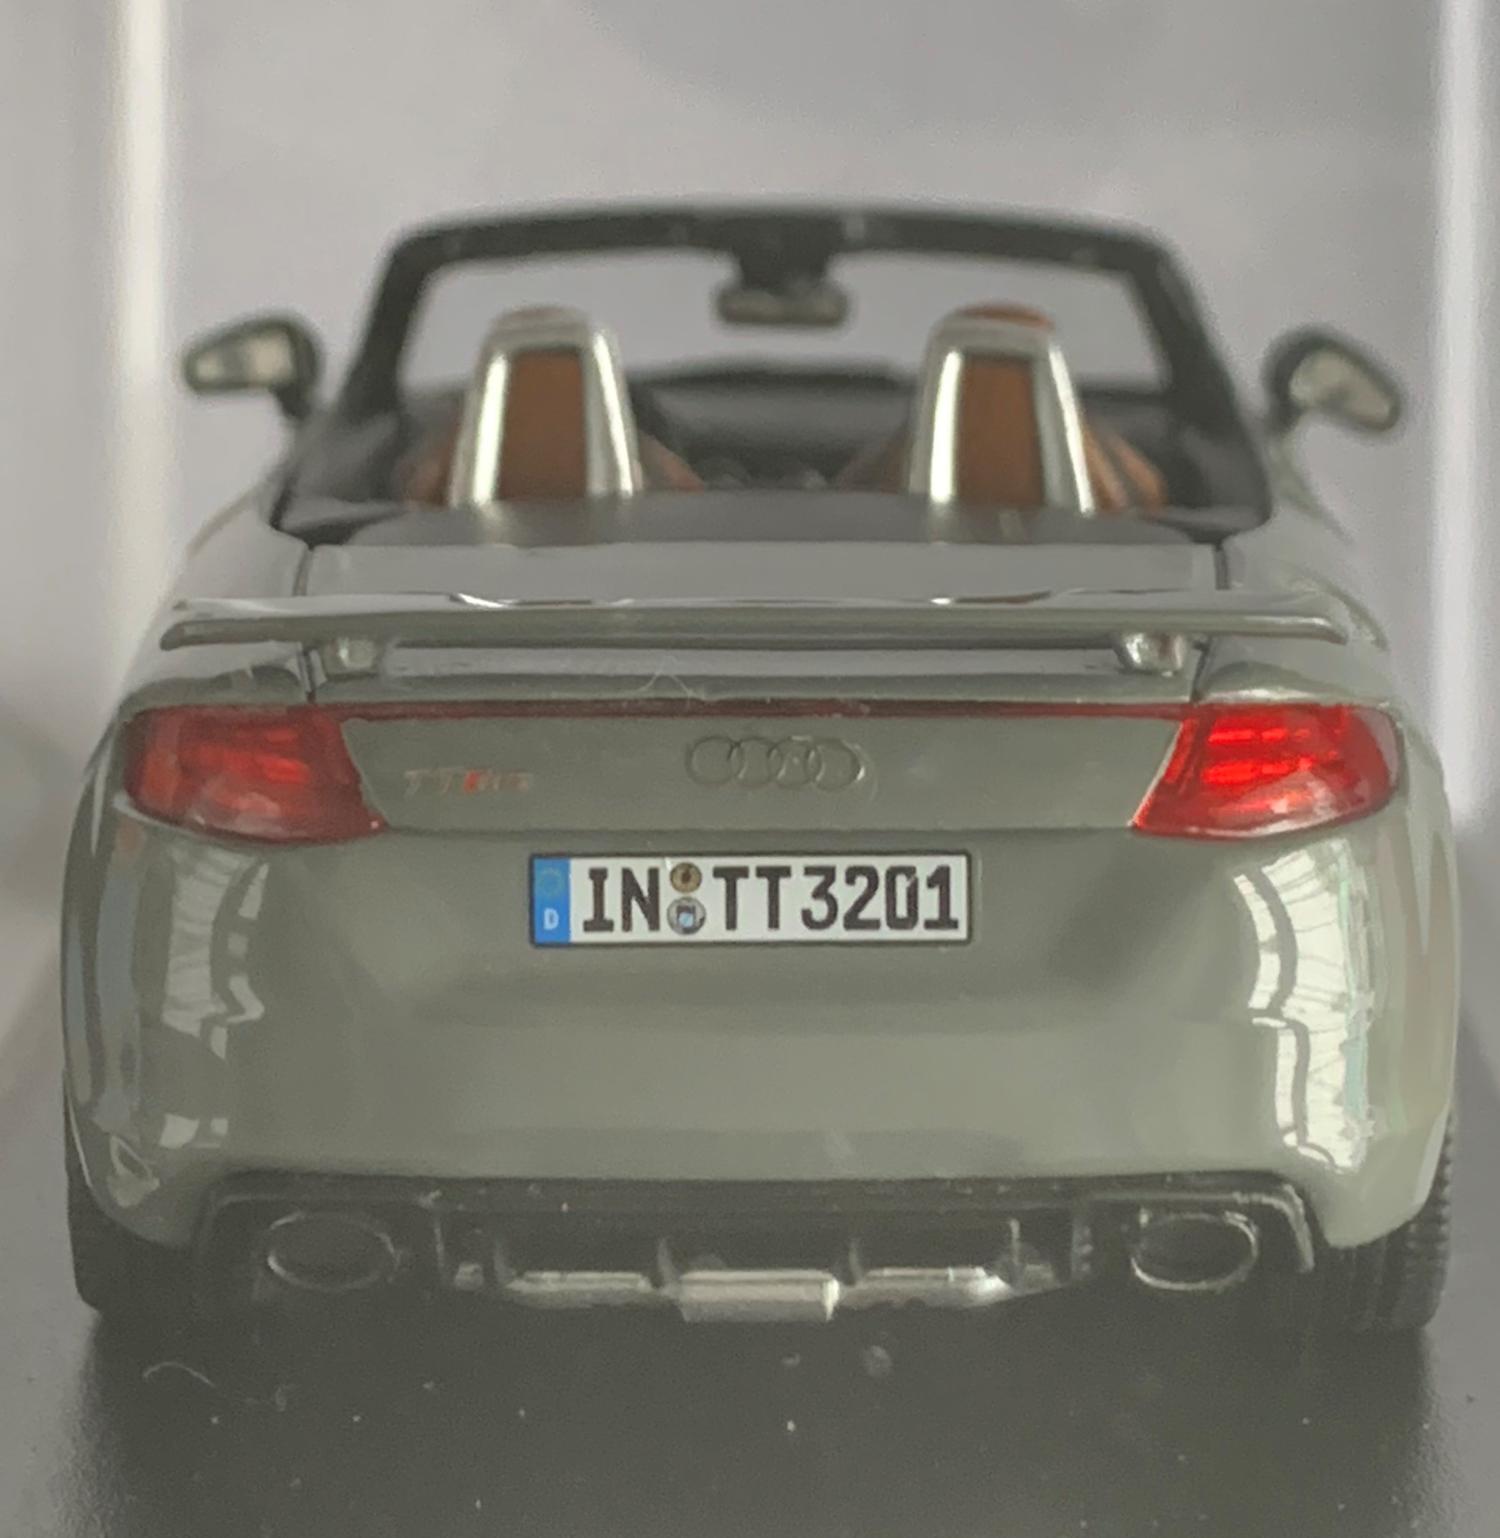 Audi TT RS Roadster in nardo grey 1:43 scale diecast model from  the Audi Collection made by  iScale